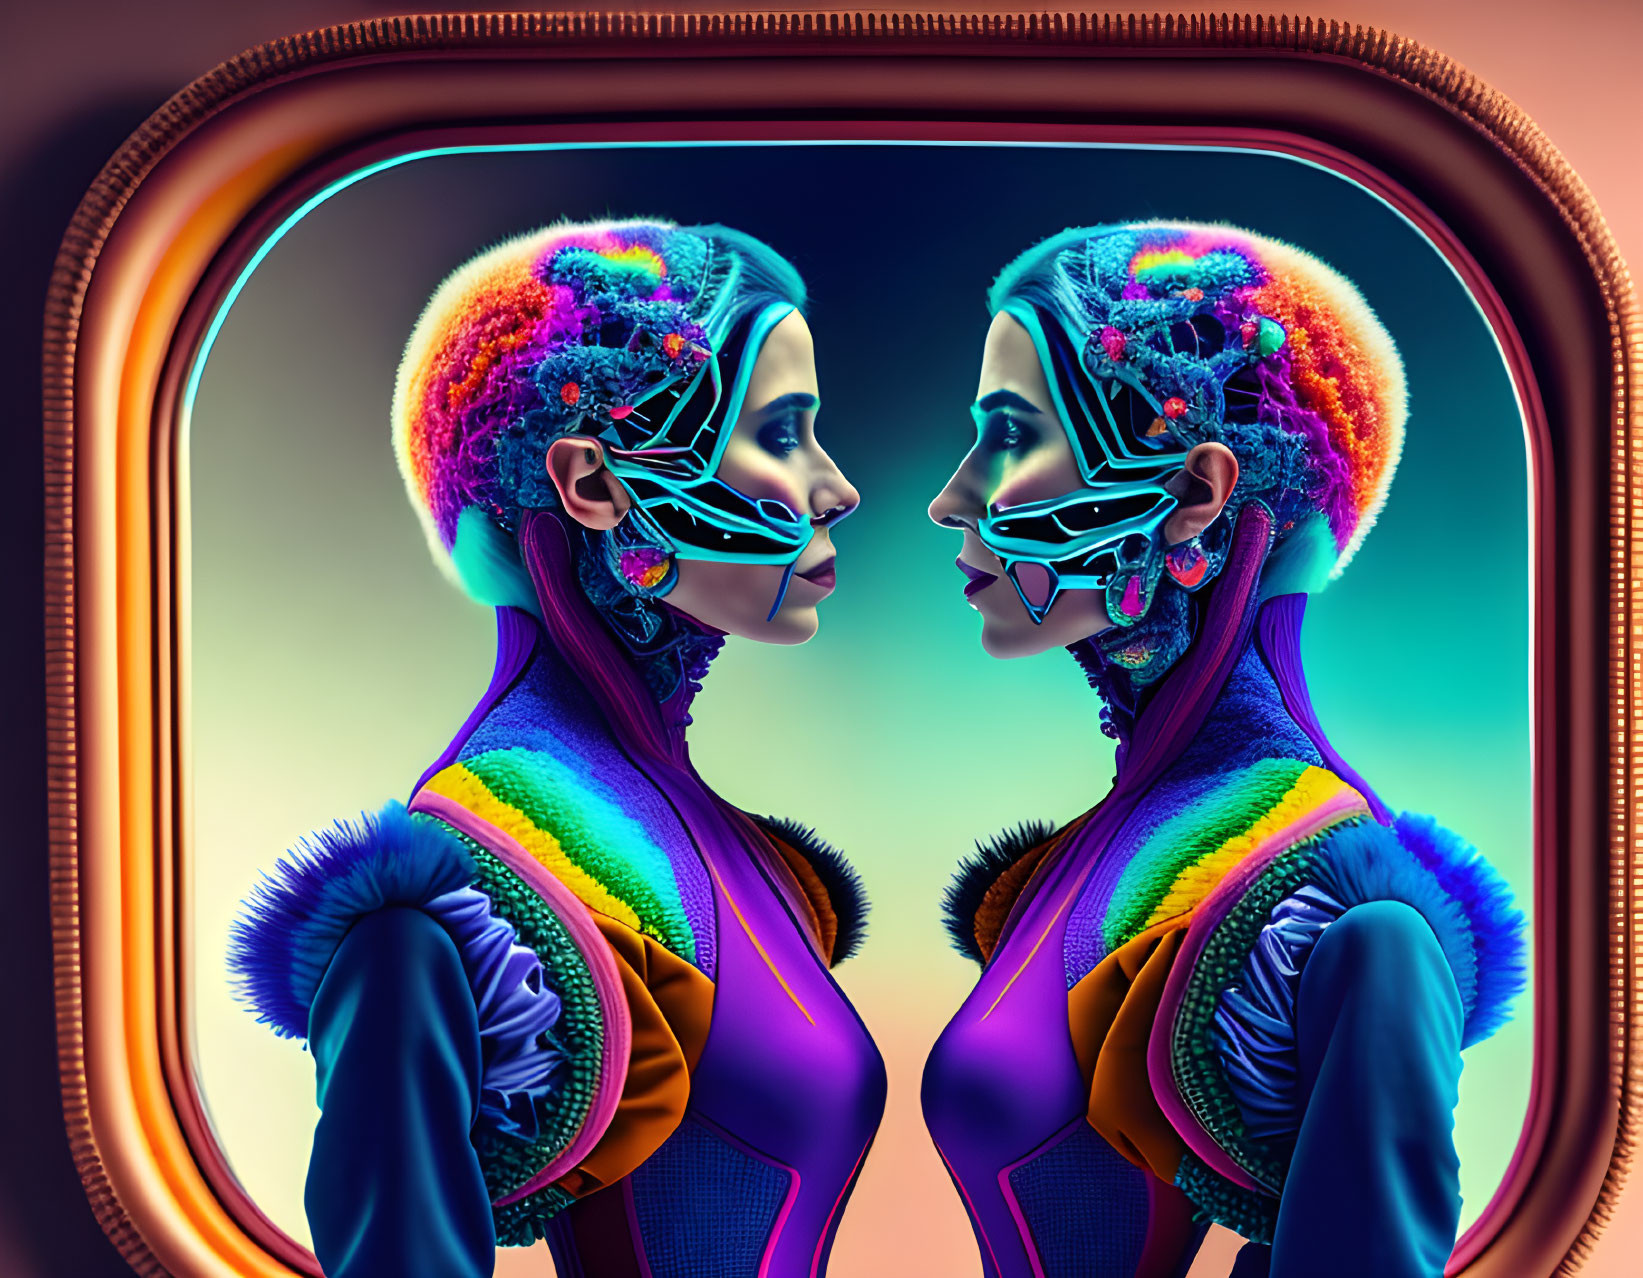 Futuristic women with colorful hairstyles and cybernetic enhancements in mirror